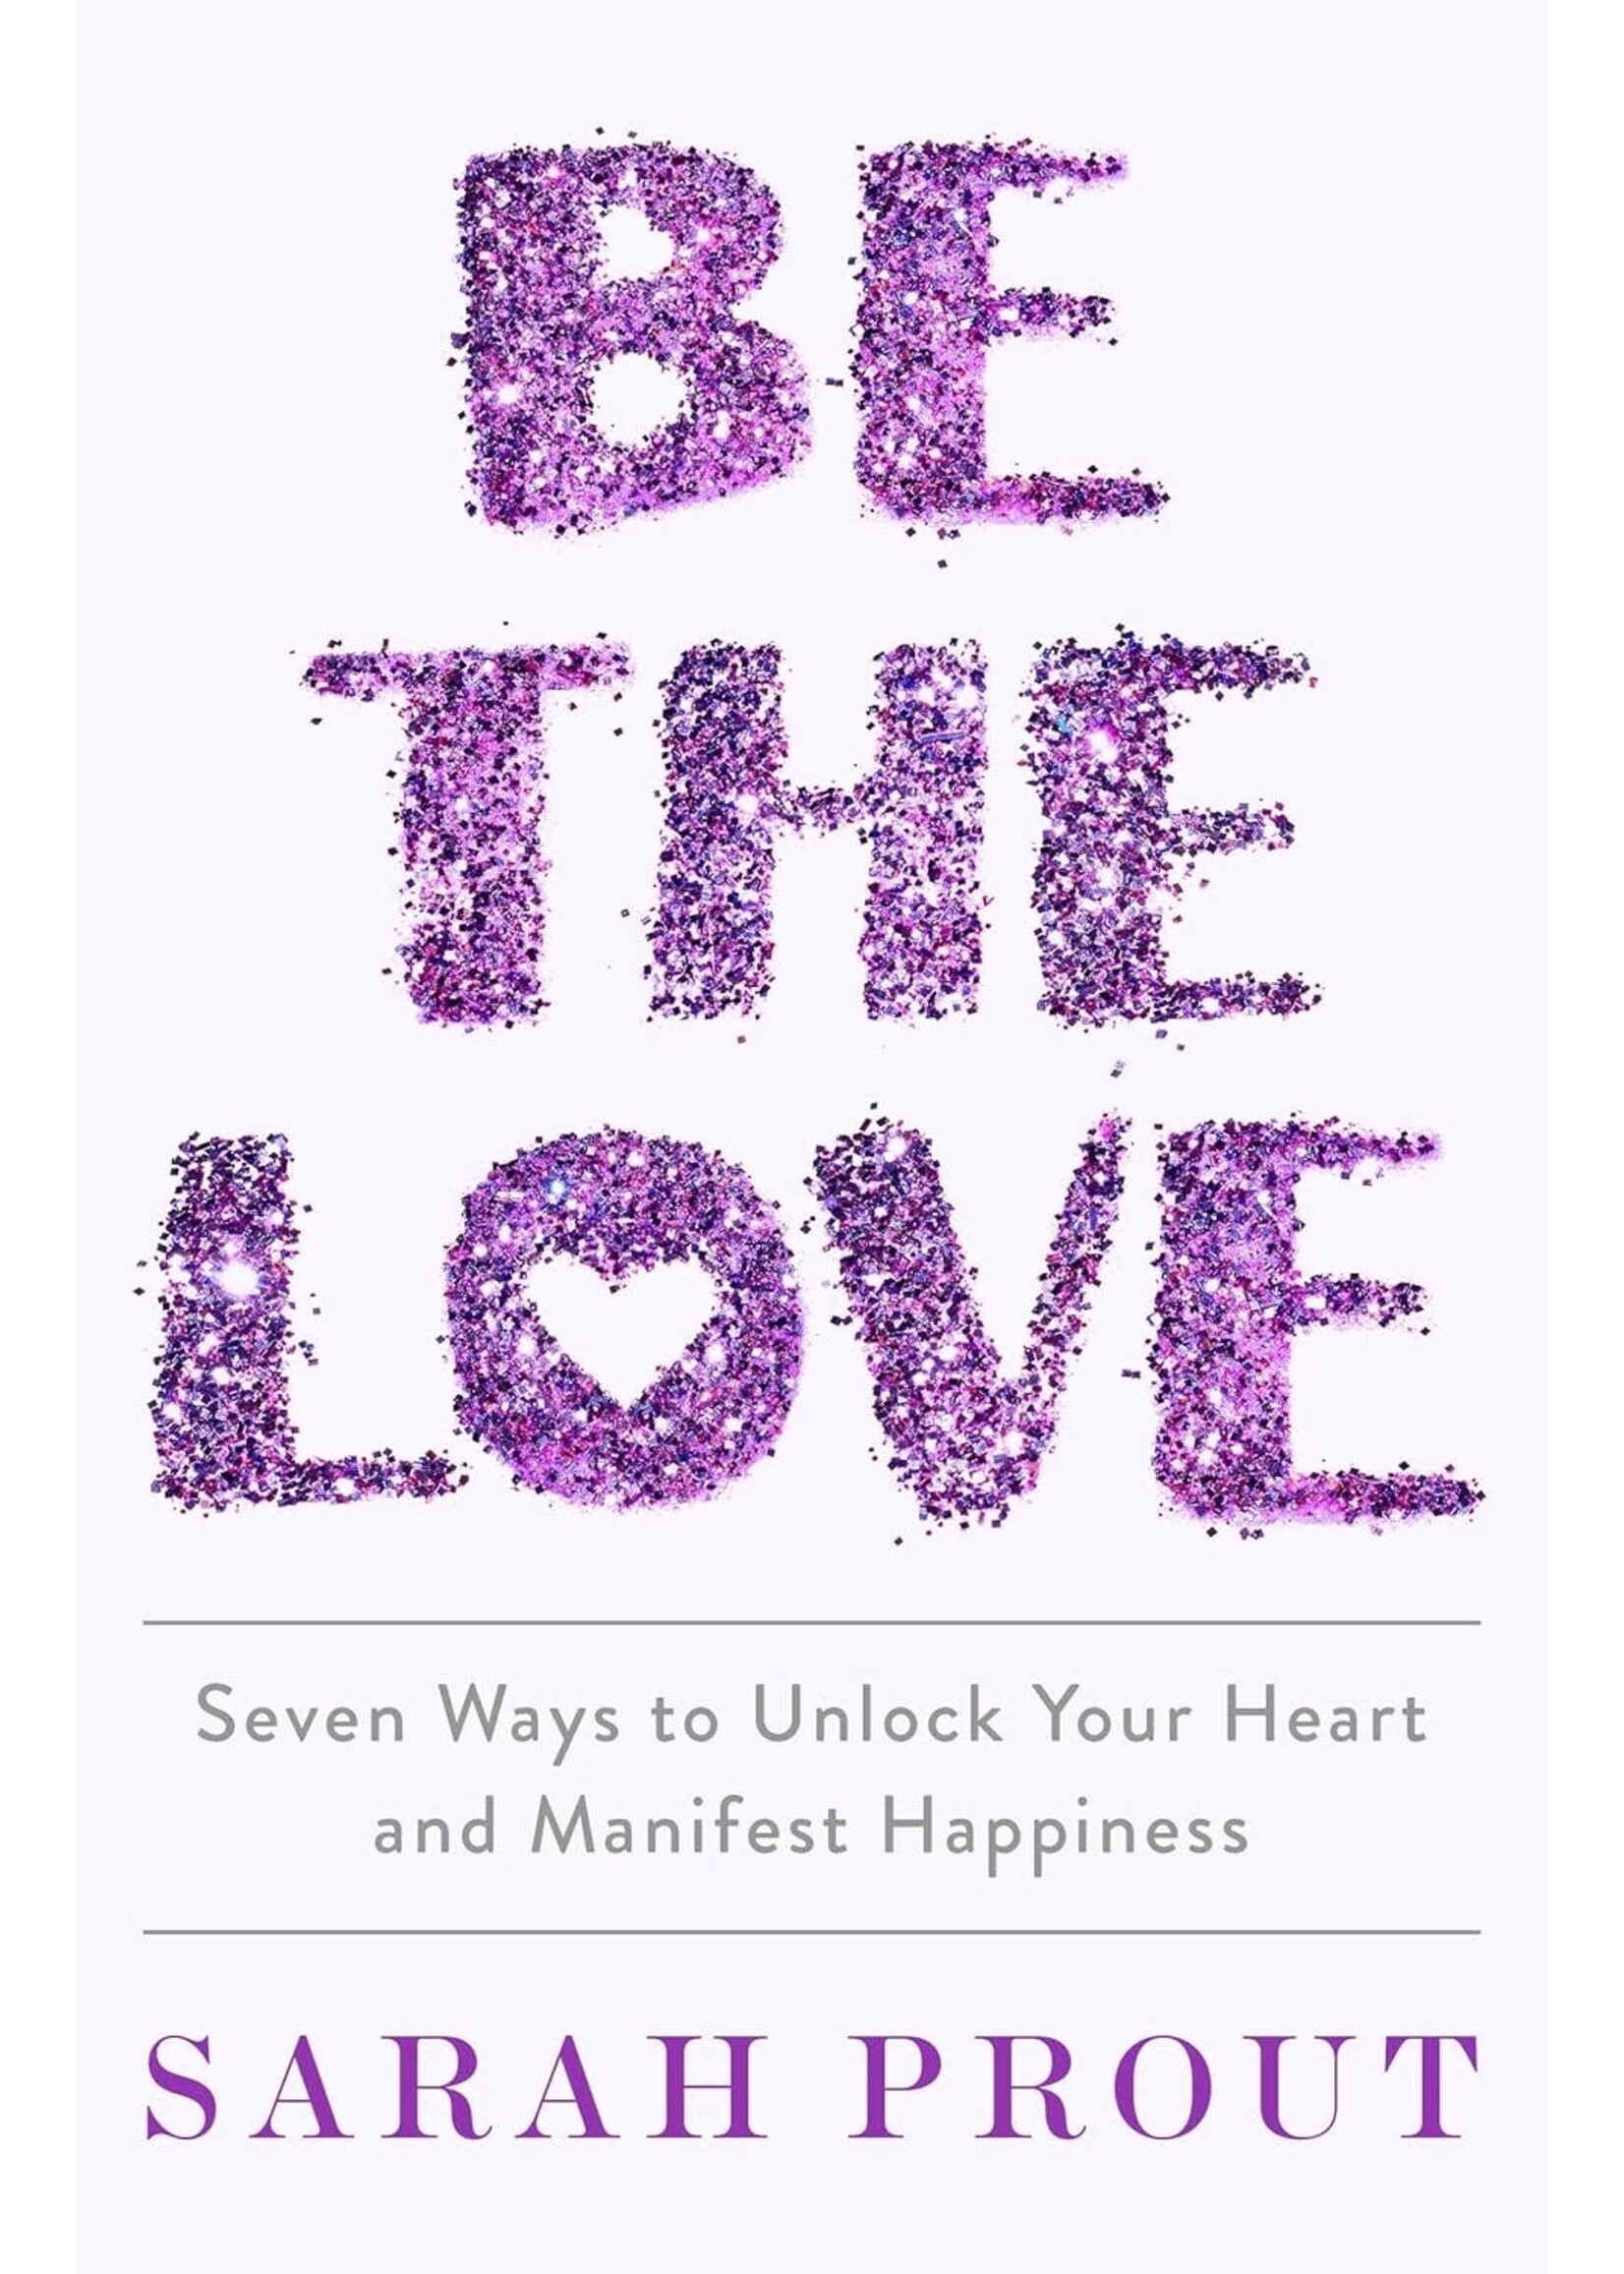 Be The Love - Seven Ways to Unlock Your Heart and Manifest Happiness